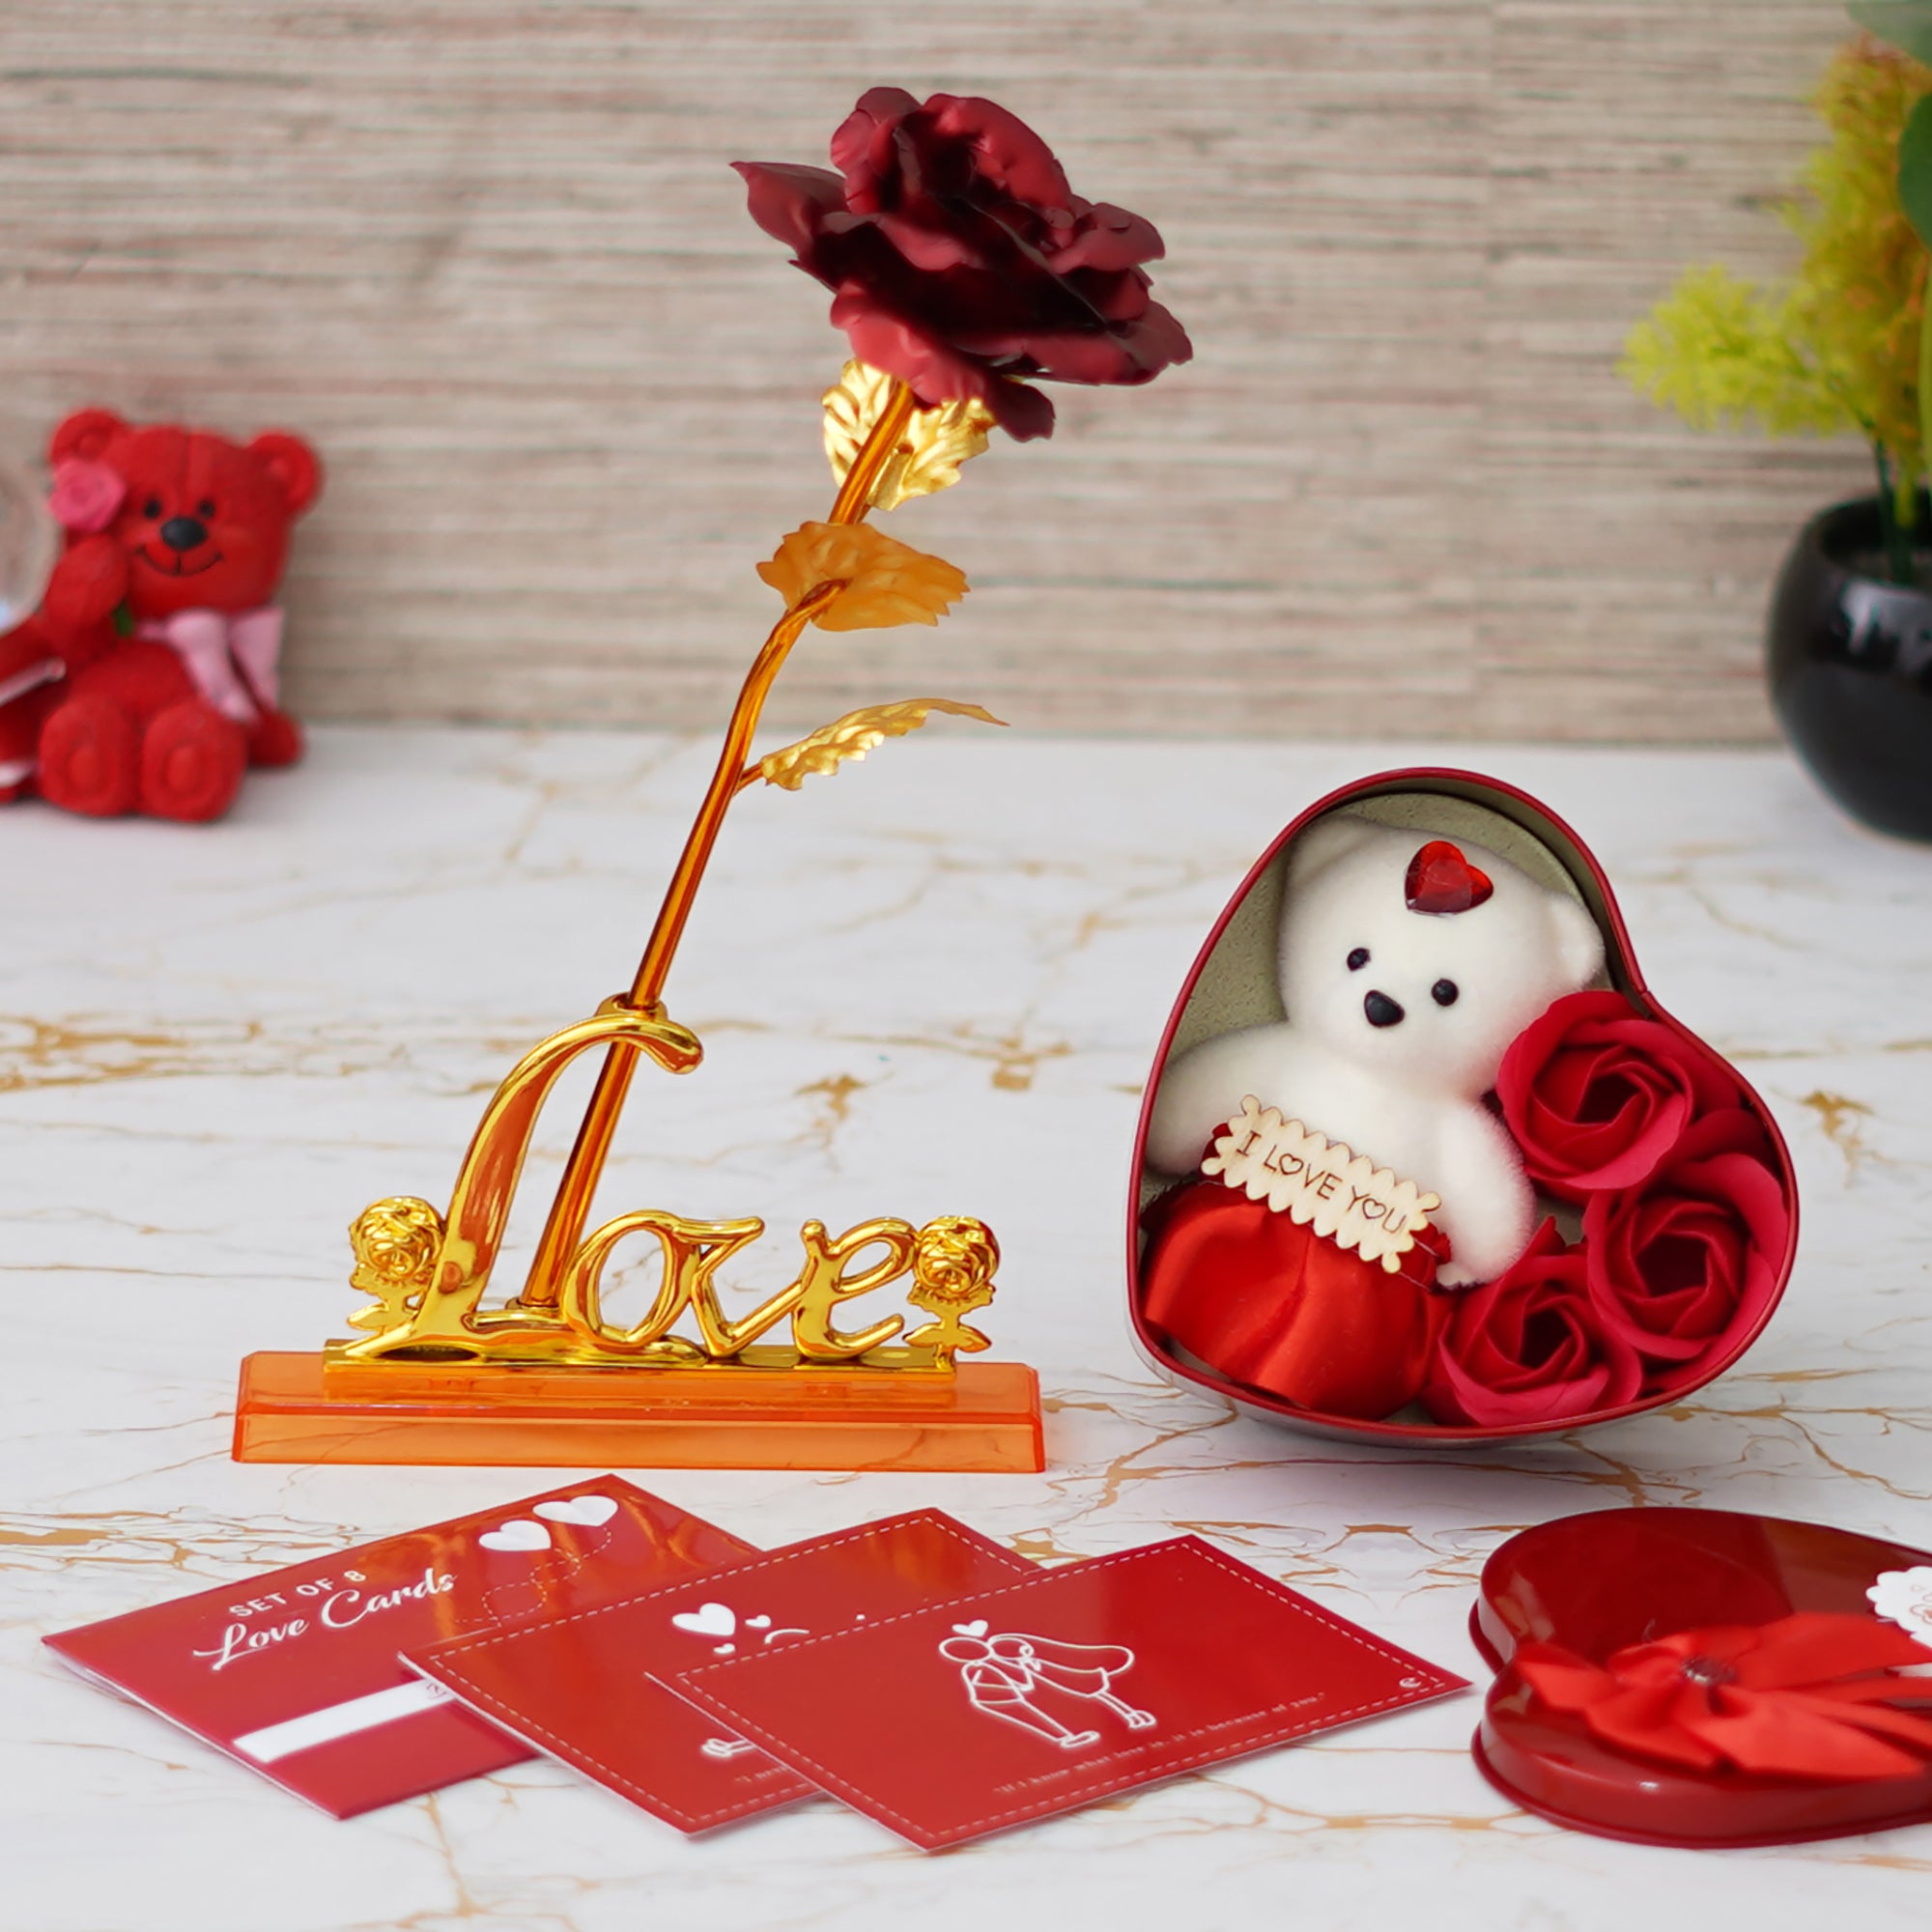 Valentine Combo of Set of 8 Love Post Cards Gift Cards Set, Love Golden Red Rose Table Decor Gift Set Showpiece, Heart Shaped Gift Box Set with White Teddy and Red Roses